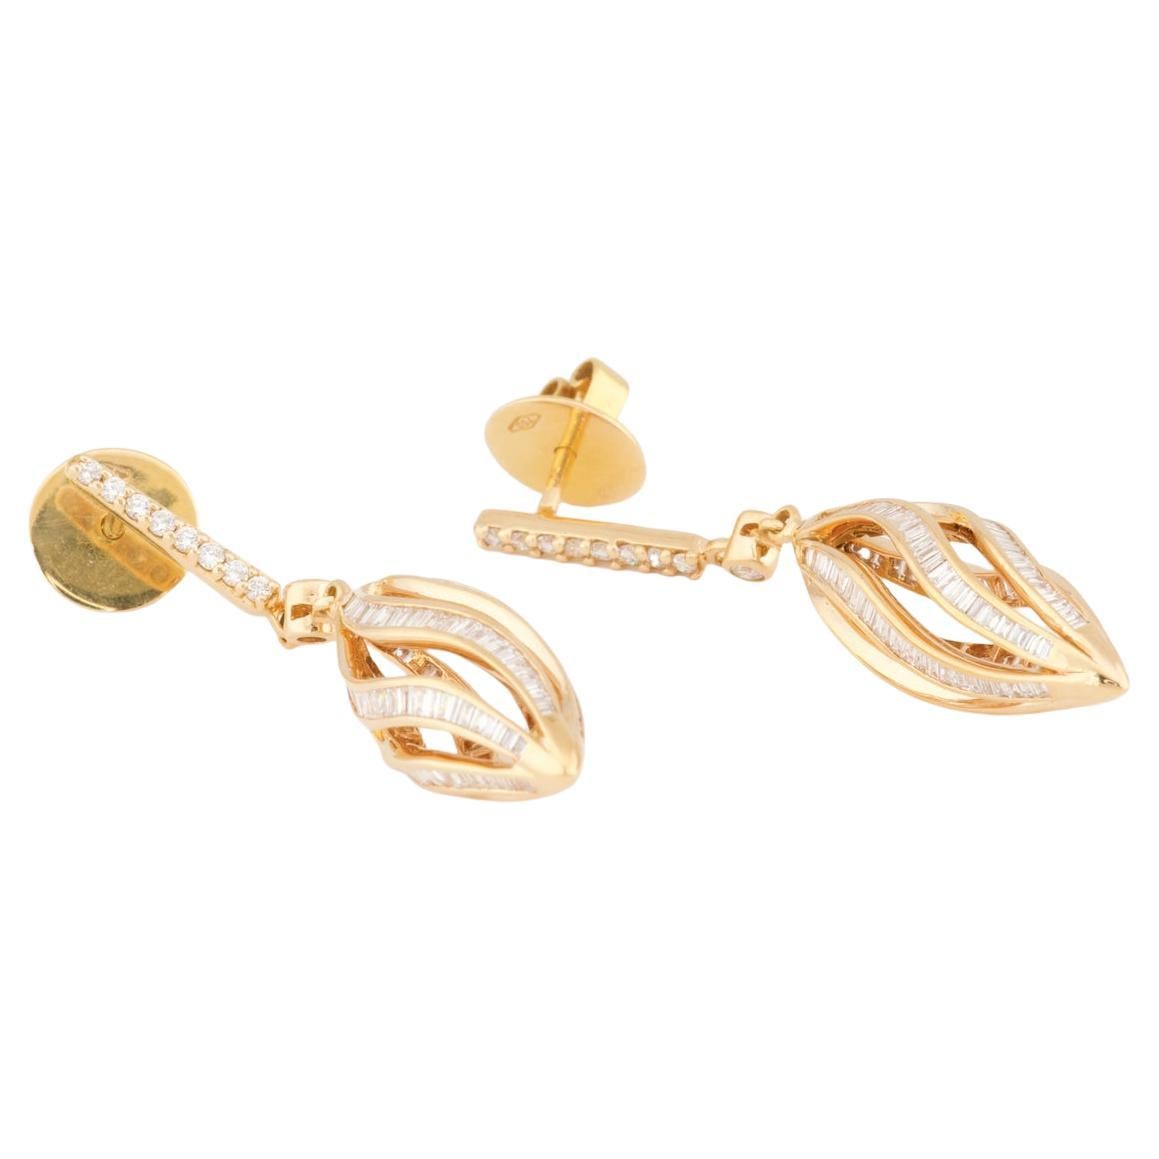 Olympus Art Certified, Unique Art, Pink Gold, Diamond, Rain Drop Earrings In New Condition For Sale In Istanbul, TR